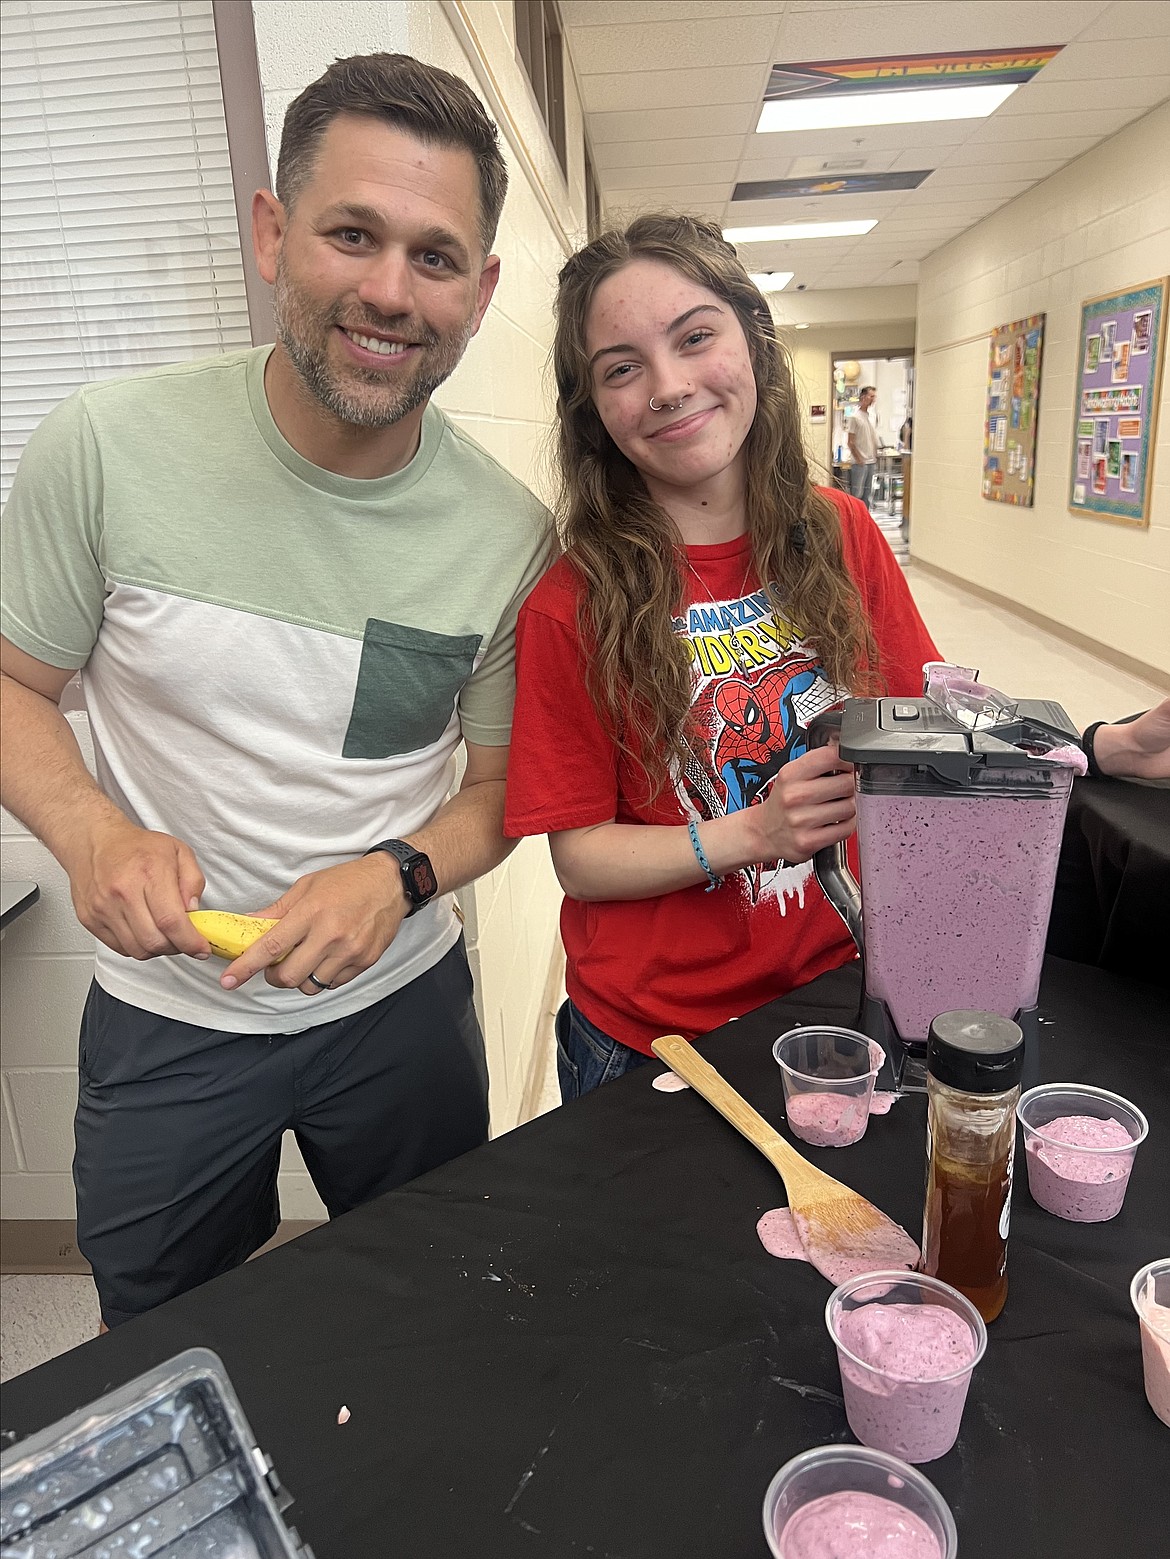 Sophomore Shianne Zulas leads the smoothie and infused water station Wednesday evening along with health teacher Tony Hook during Venture Academy's Exhibit Night.